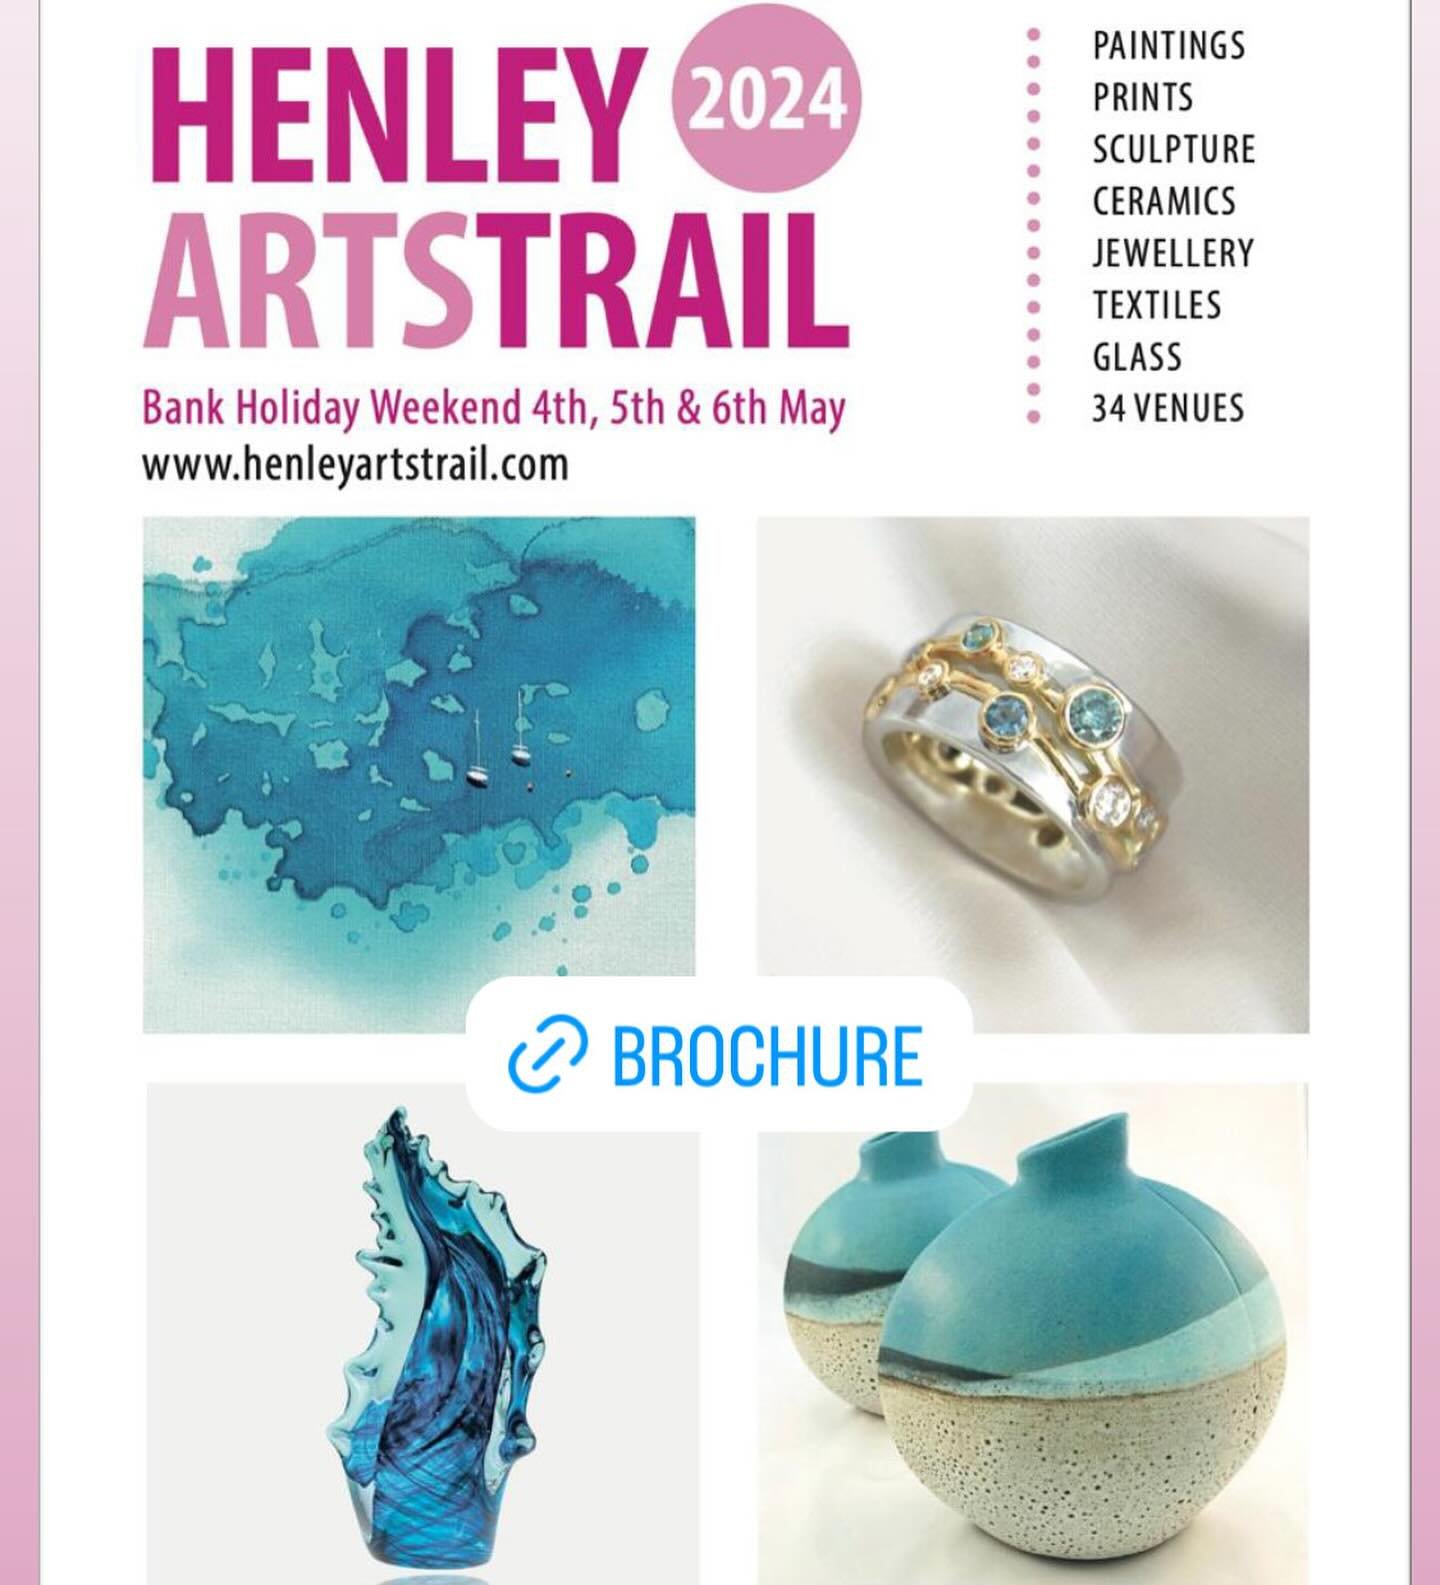 Last day to get to @riverandrowingmuseum Henley - venue 5 - in the @henleyartstrail to see my glass and stunning work of 8 other talented artists across various media. 

My Glass Art Inspired by Wilderness will be at Venue 5 River &amp; Rowing Museum